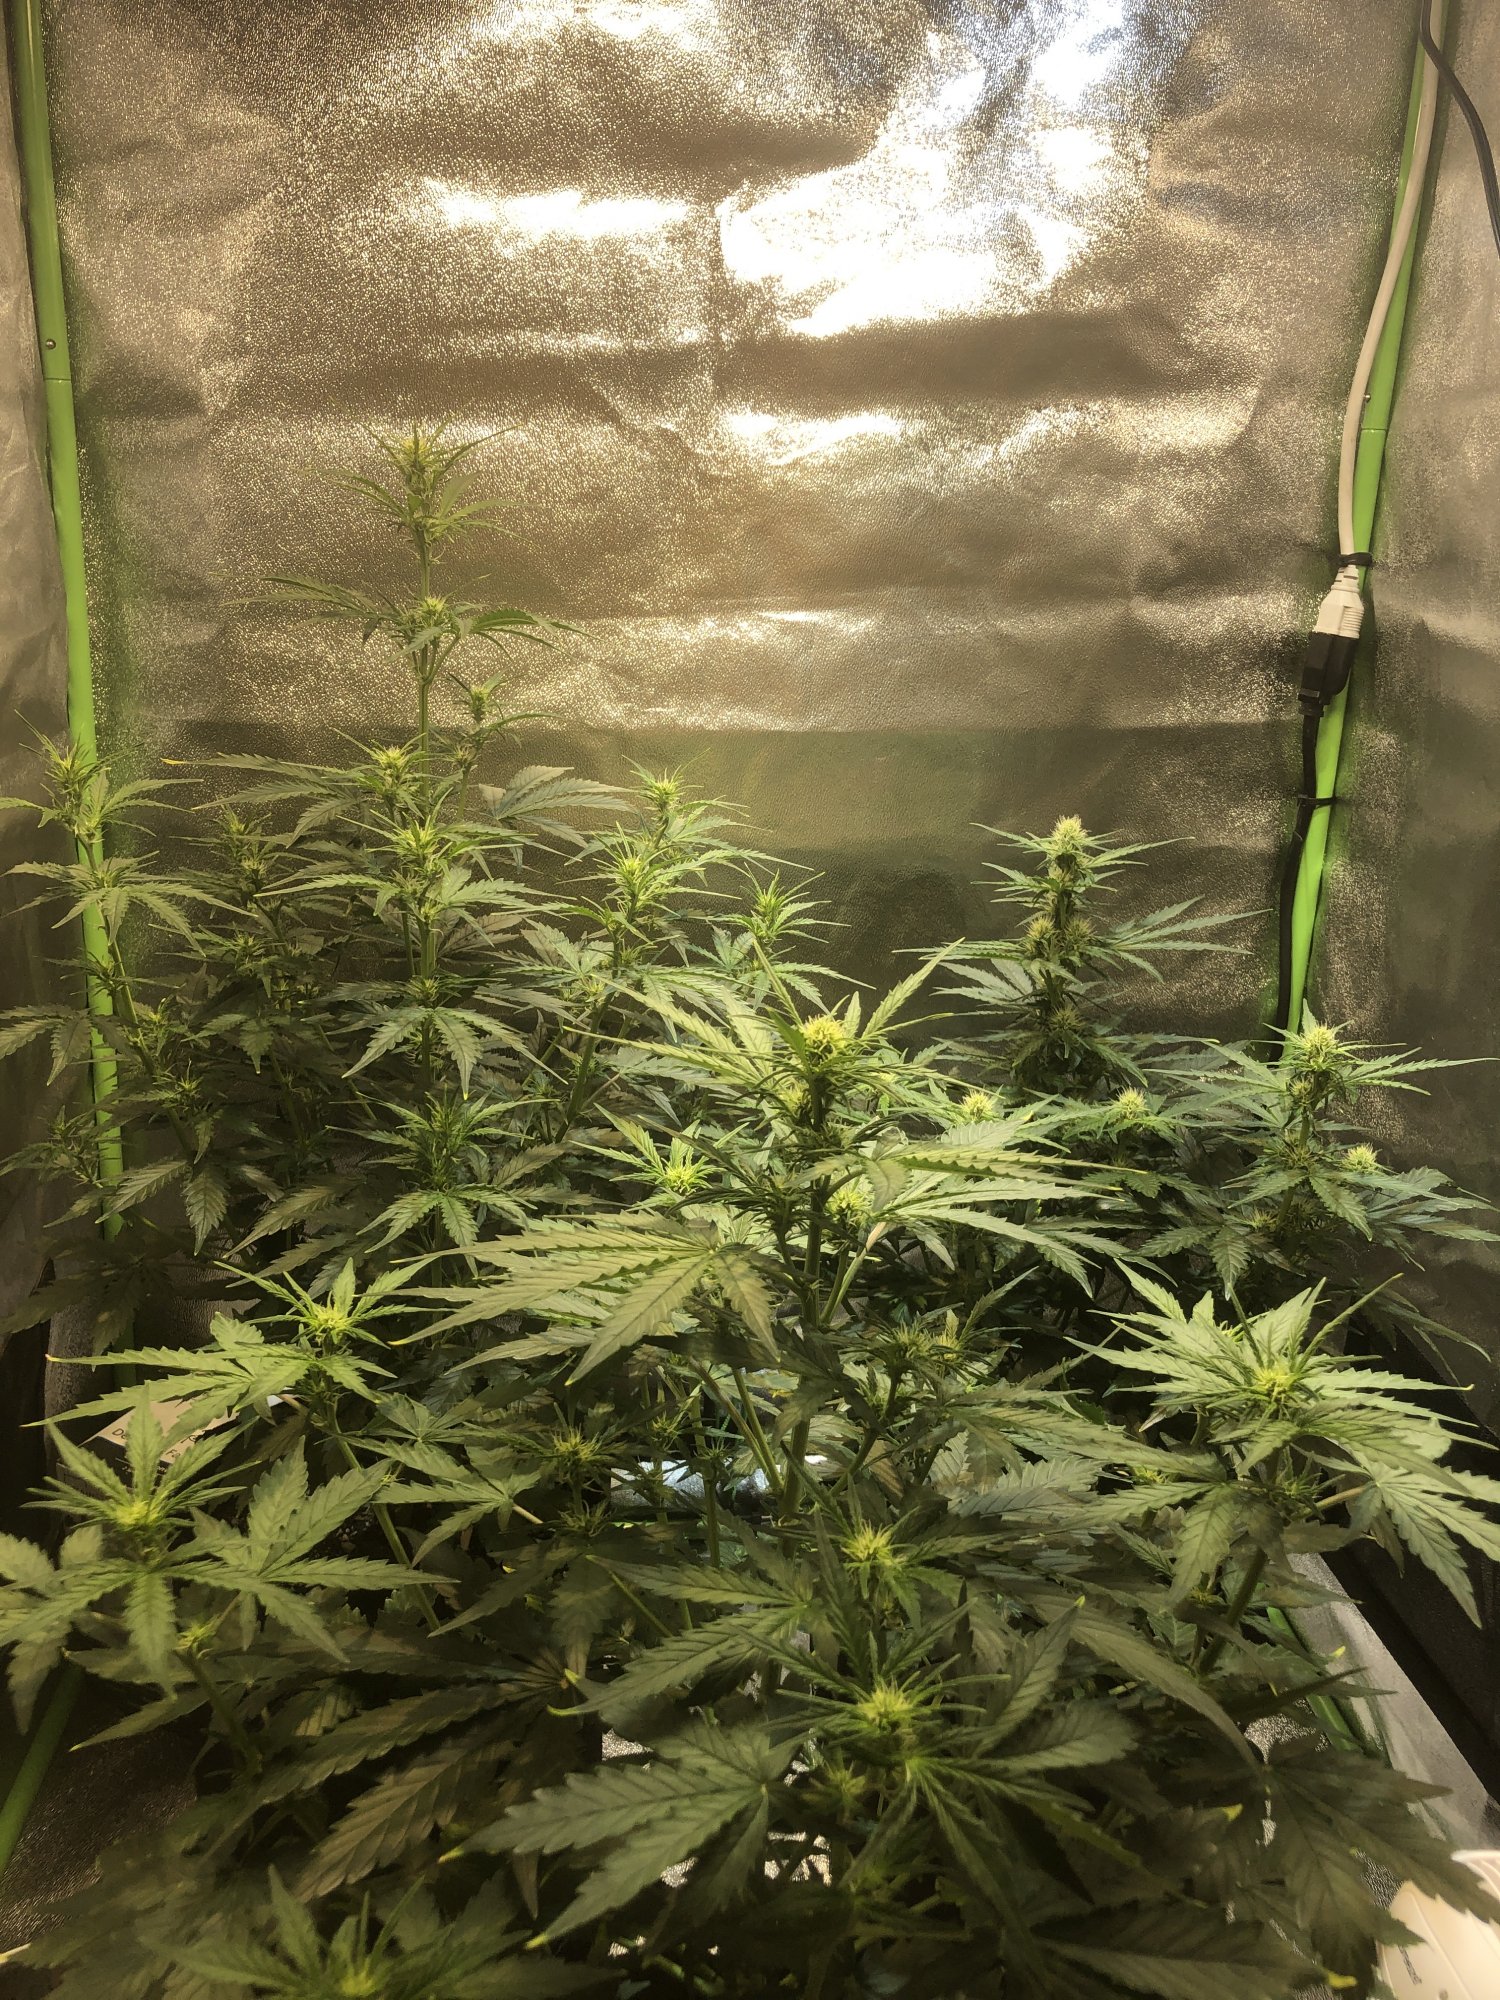 New grower with runoff question 2